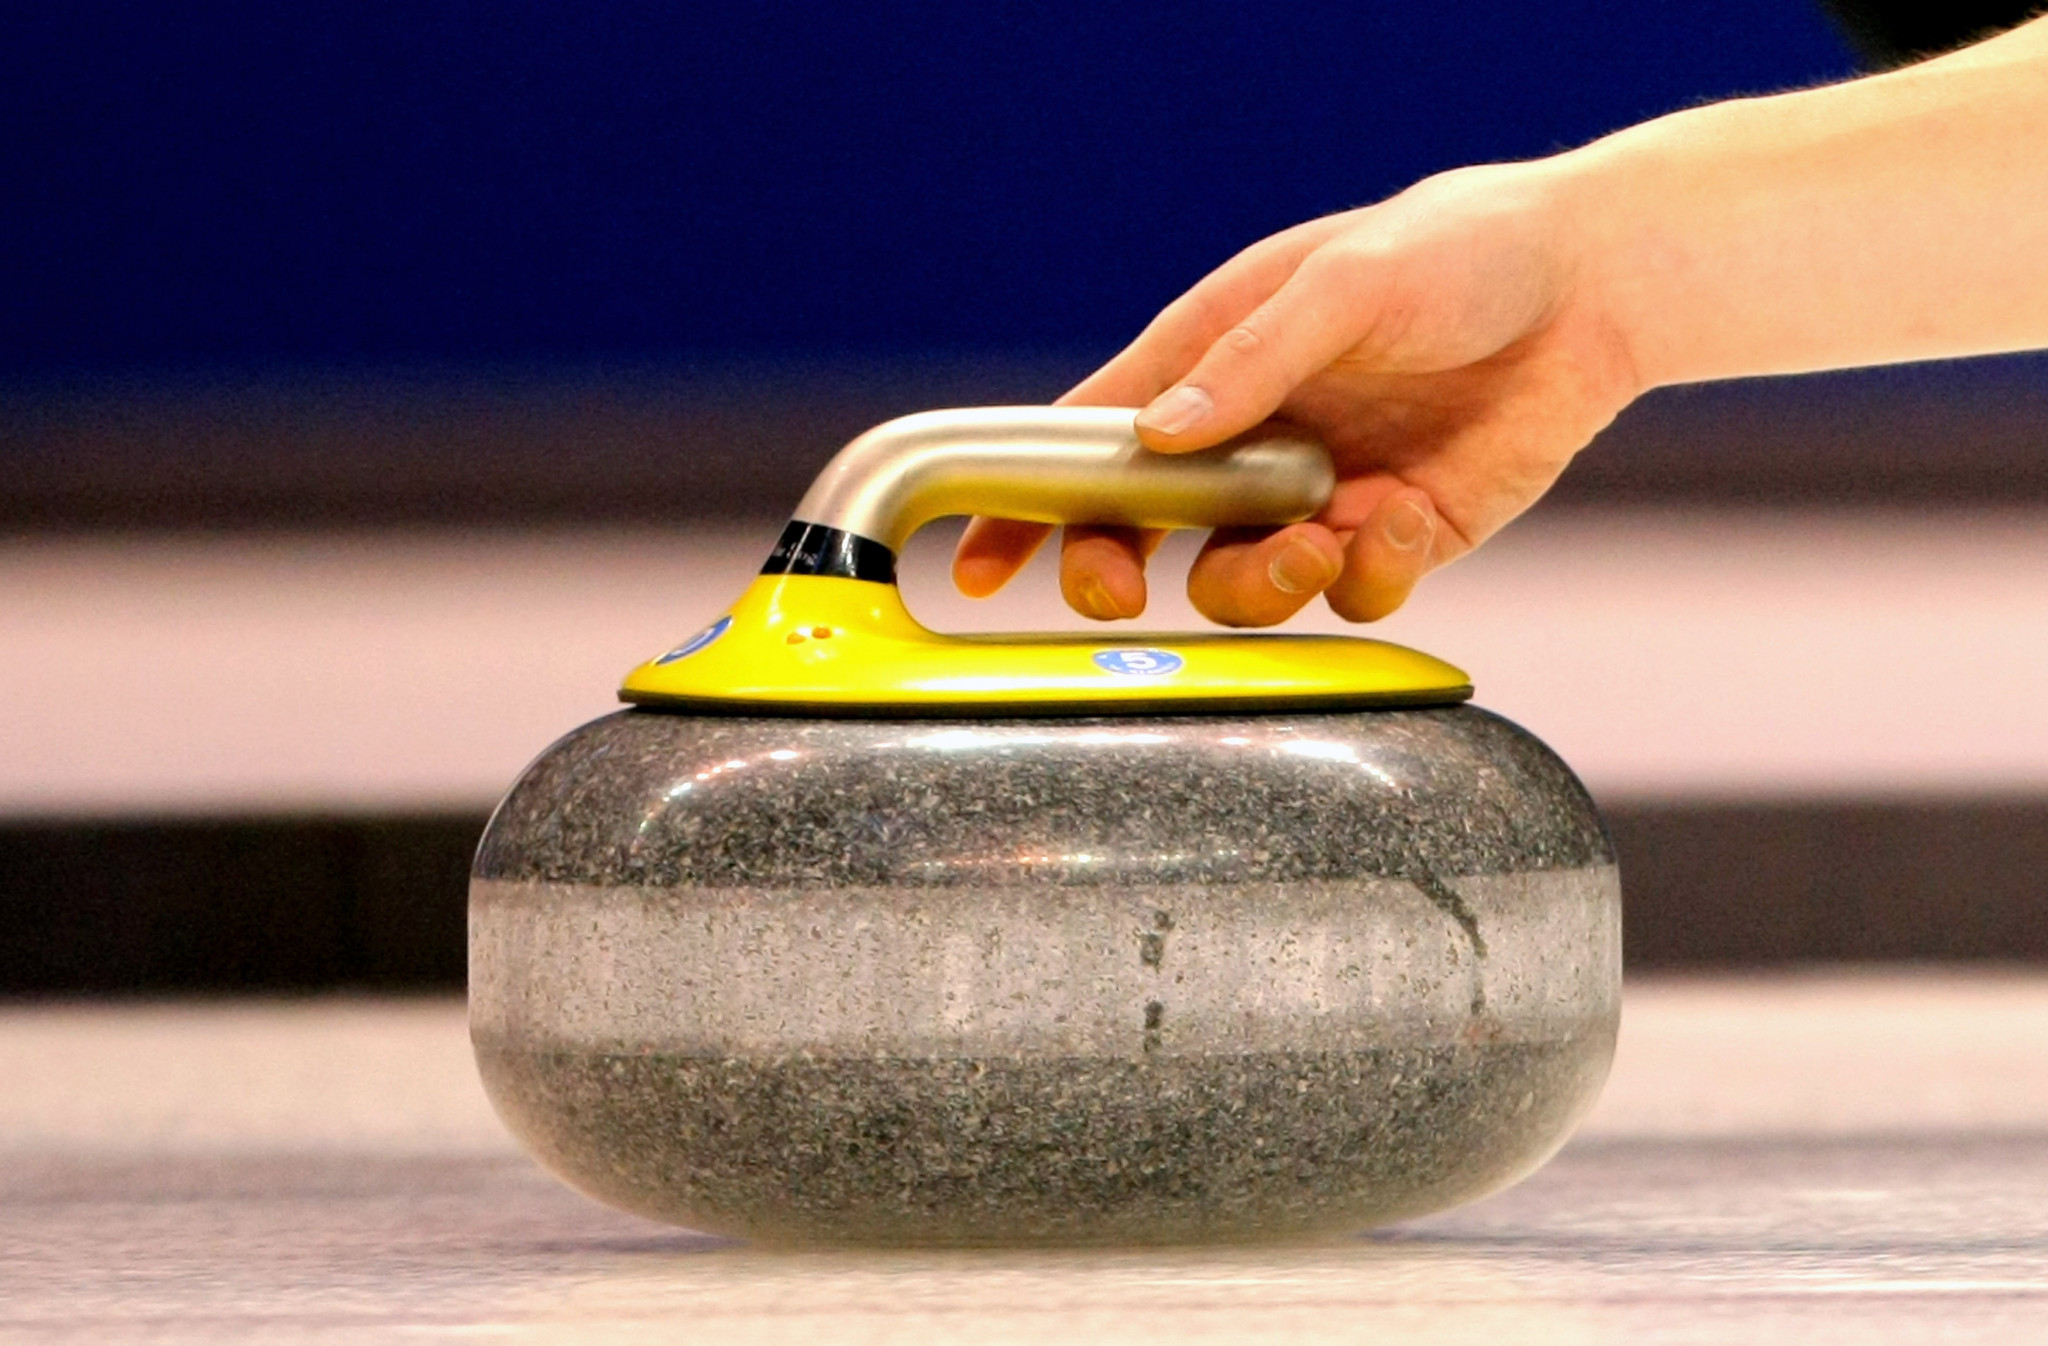 No-tick zone rule to be trialled at World Curling Championships